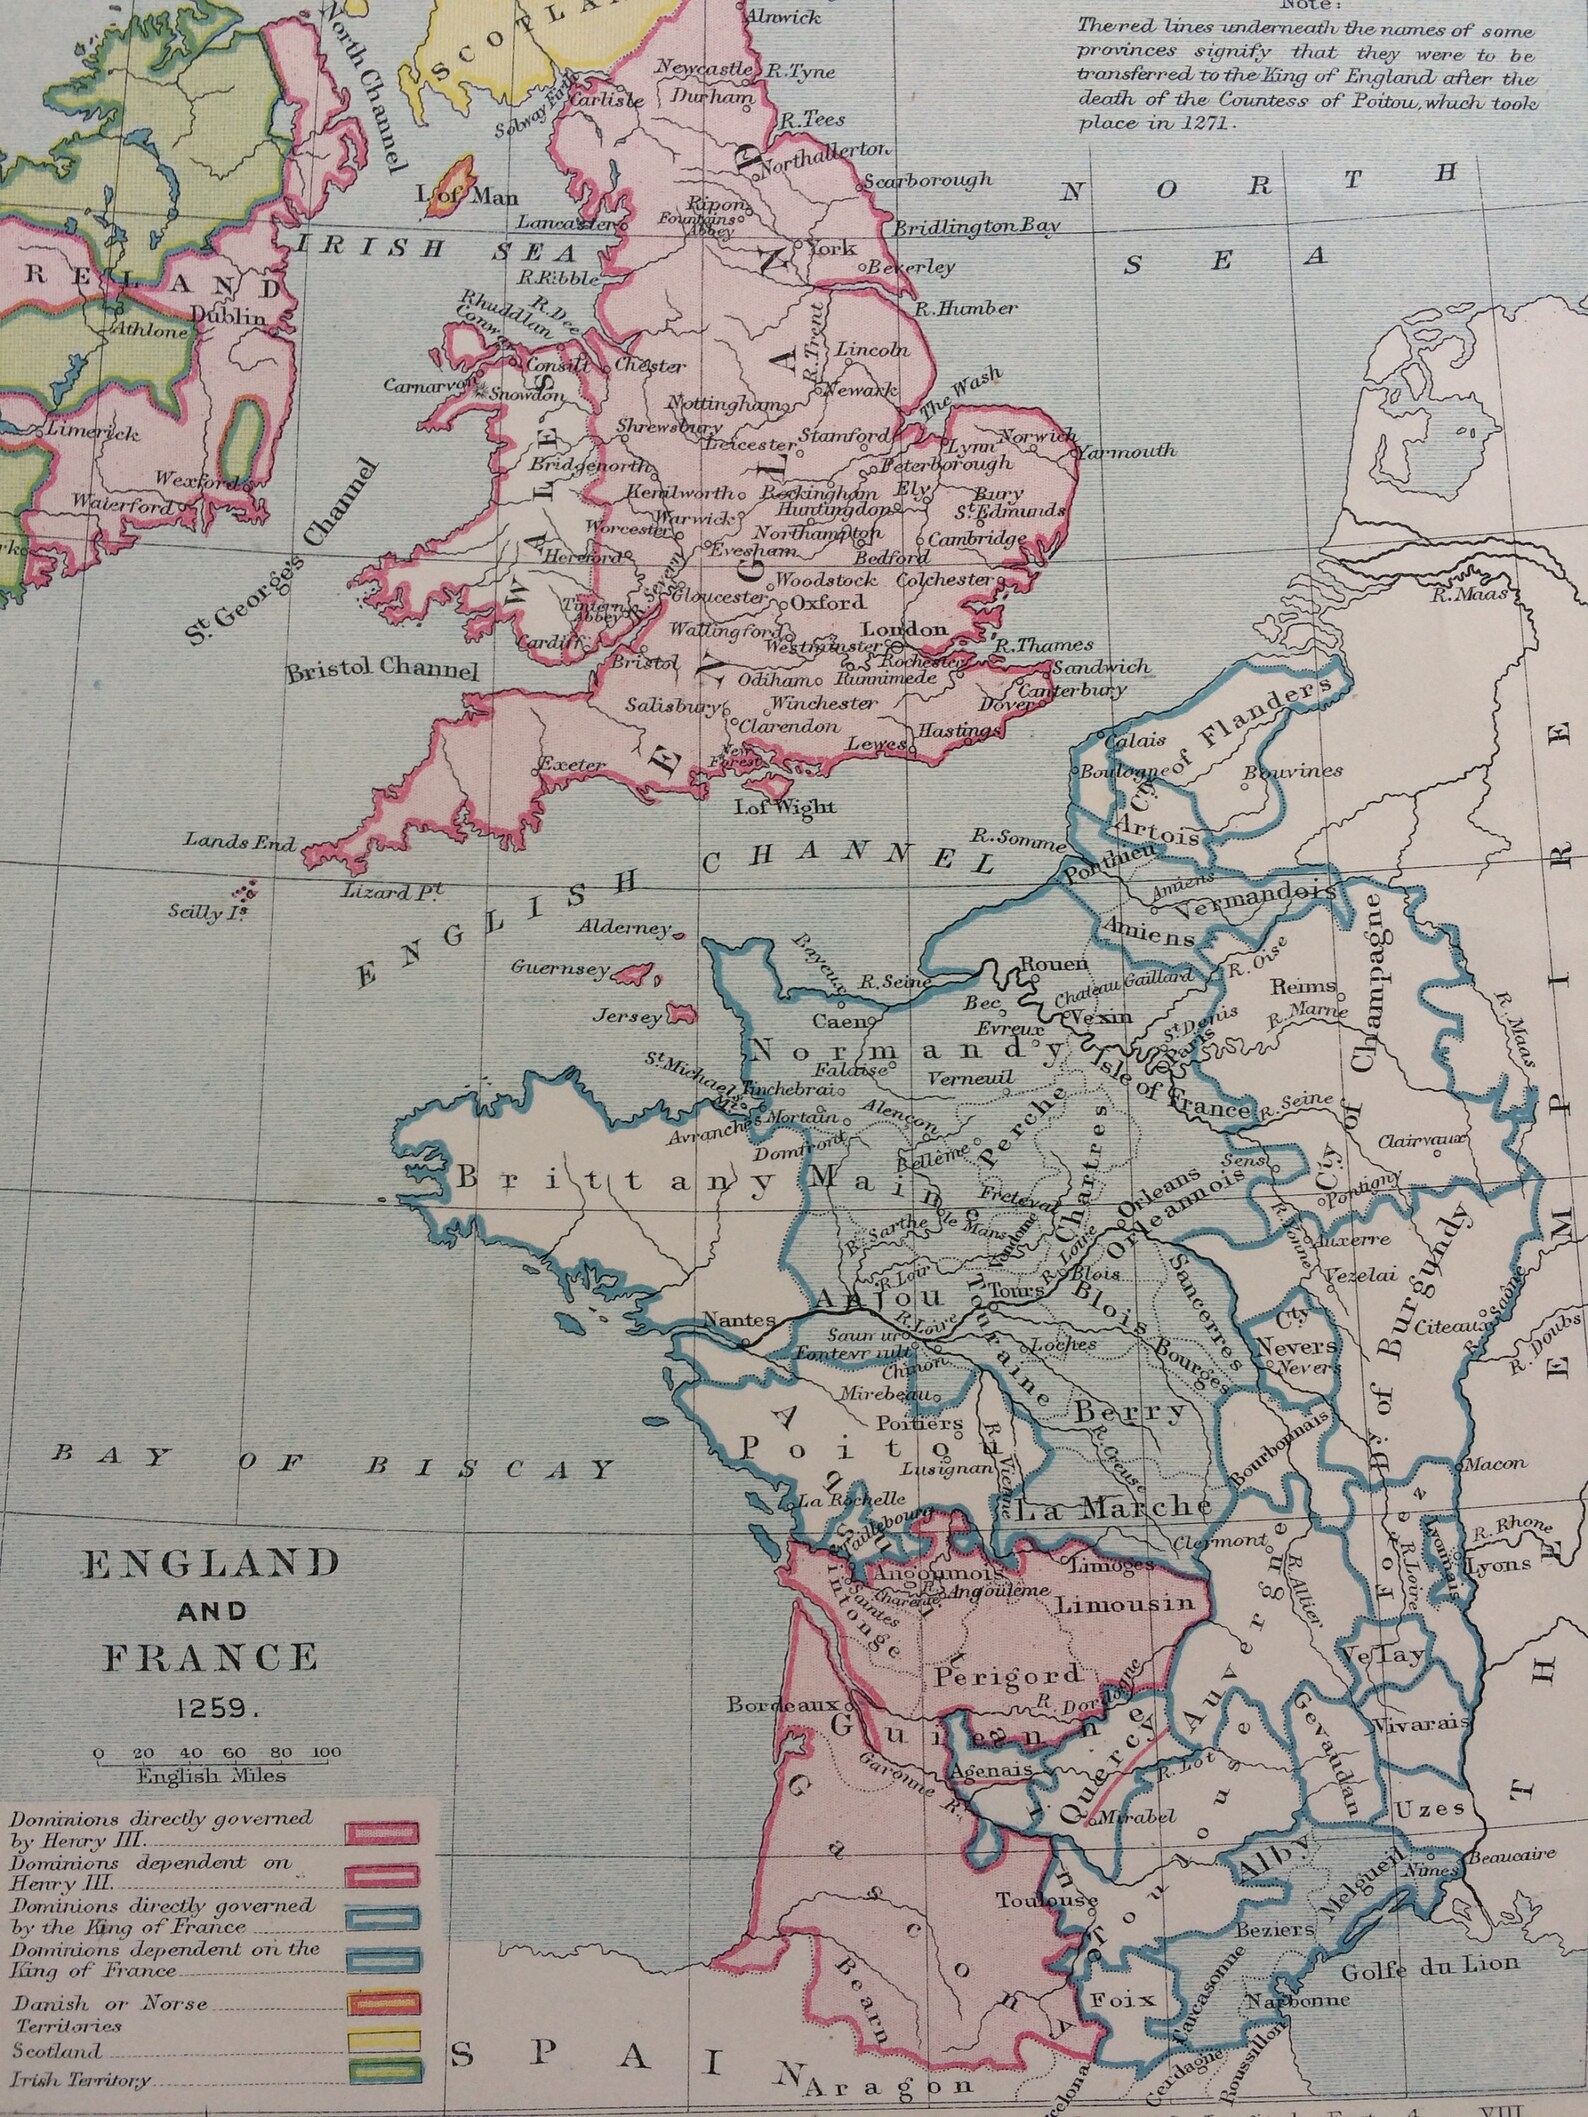 1910 England and France in 1259 Original Antique Map 10 X 12 - Etsy